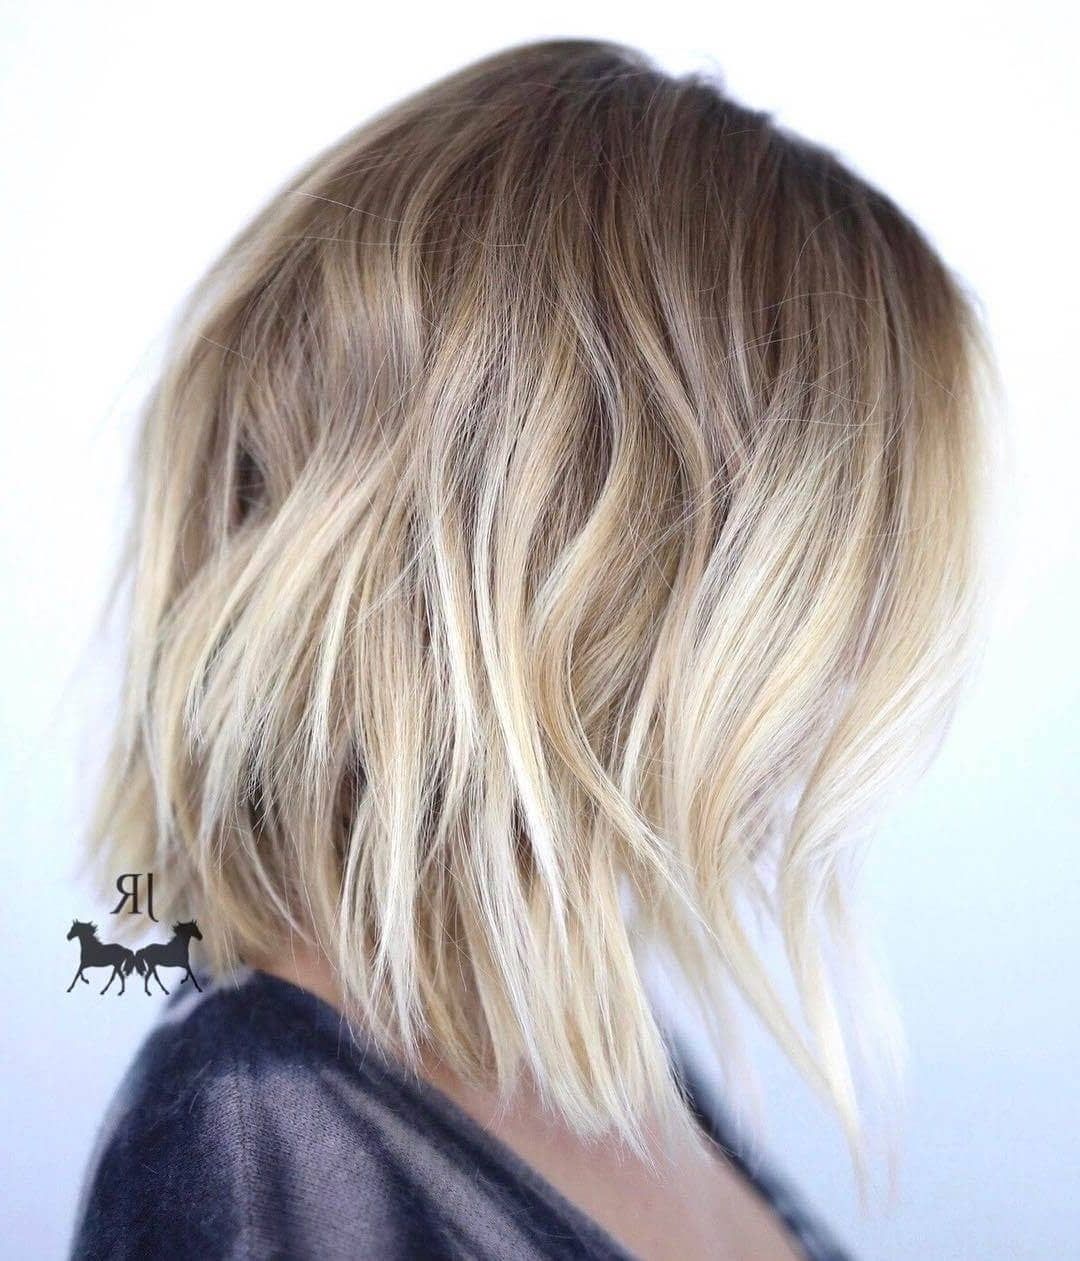 50 Fresh Short Blonde Hair Ideas To Update Your Style In 2018 In Choppy Golden Blonde Balayage Bob Hairstyles (View 10 of 25)